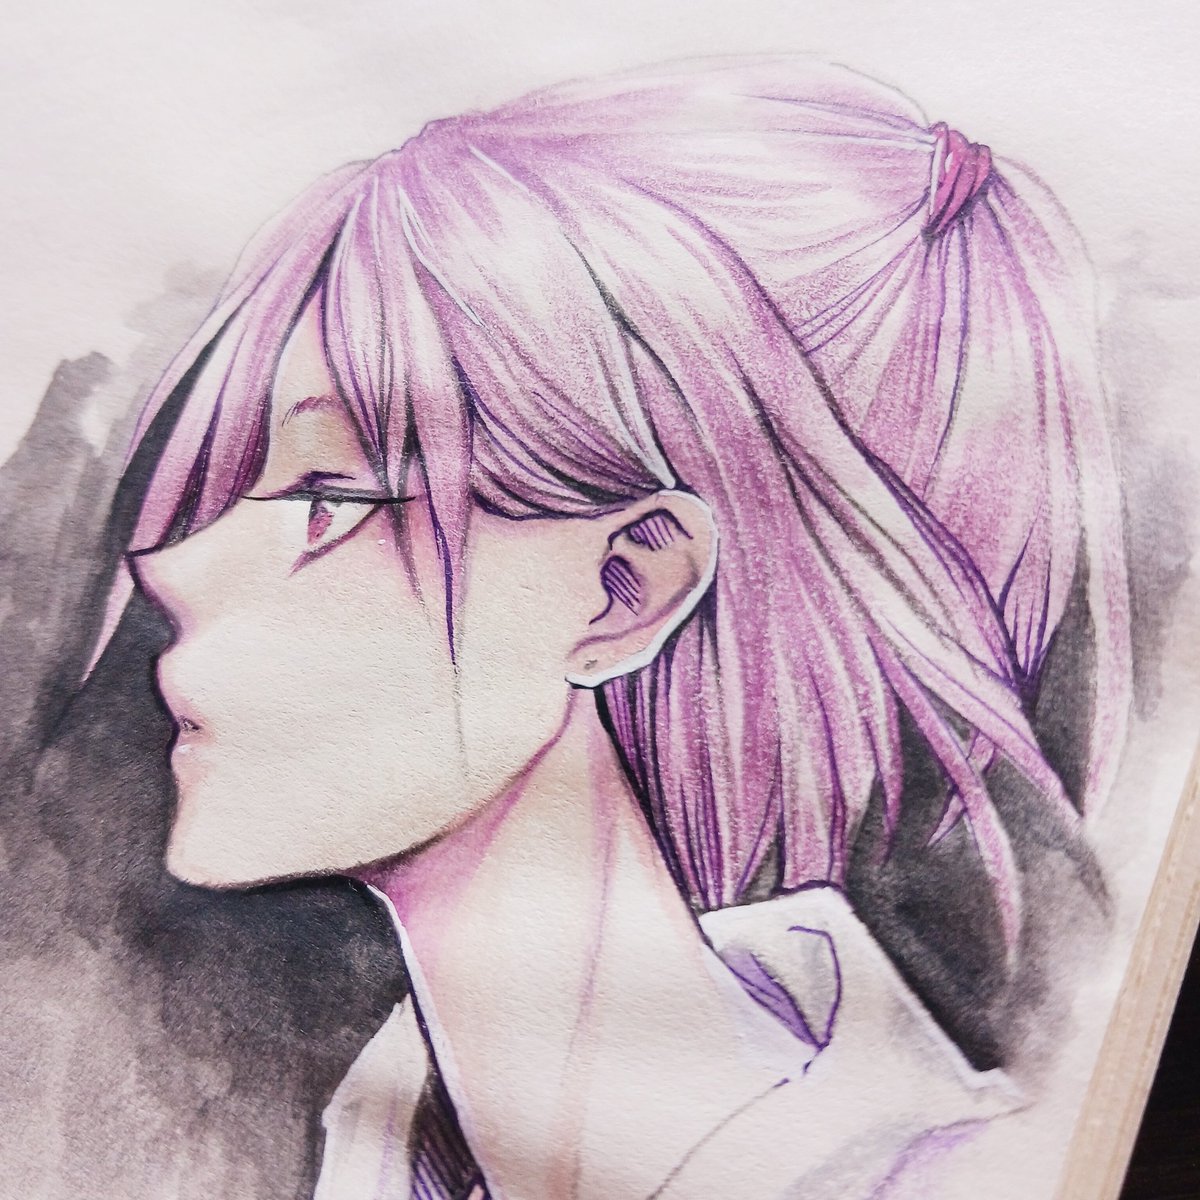 「Old color pencil sketch  」|Zambicandy (not really here)のイラスト